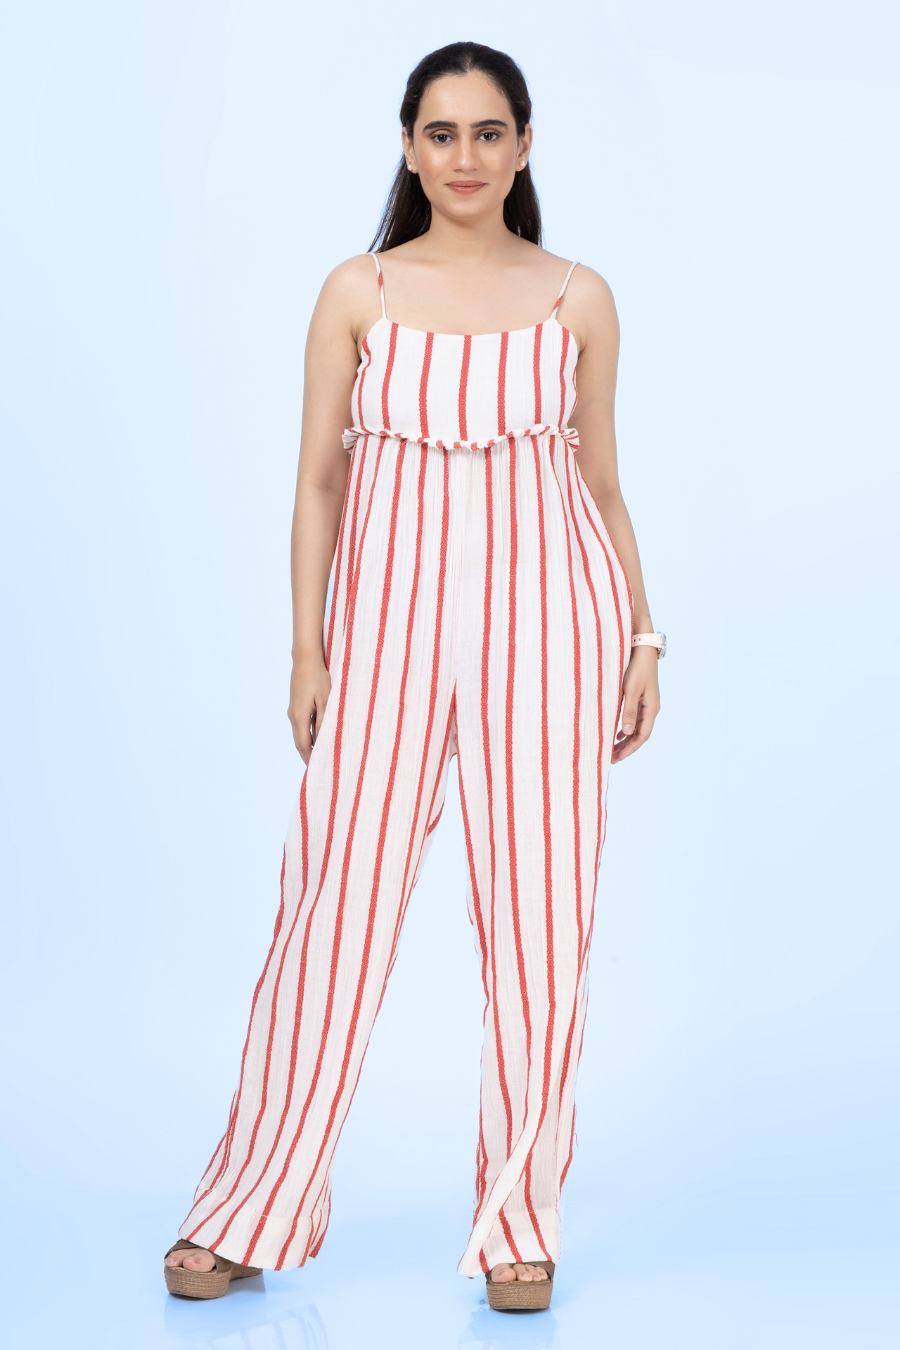 Strappy Jumpsuit Sewing Pattern 'Lola'